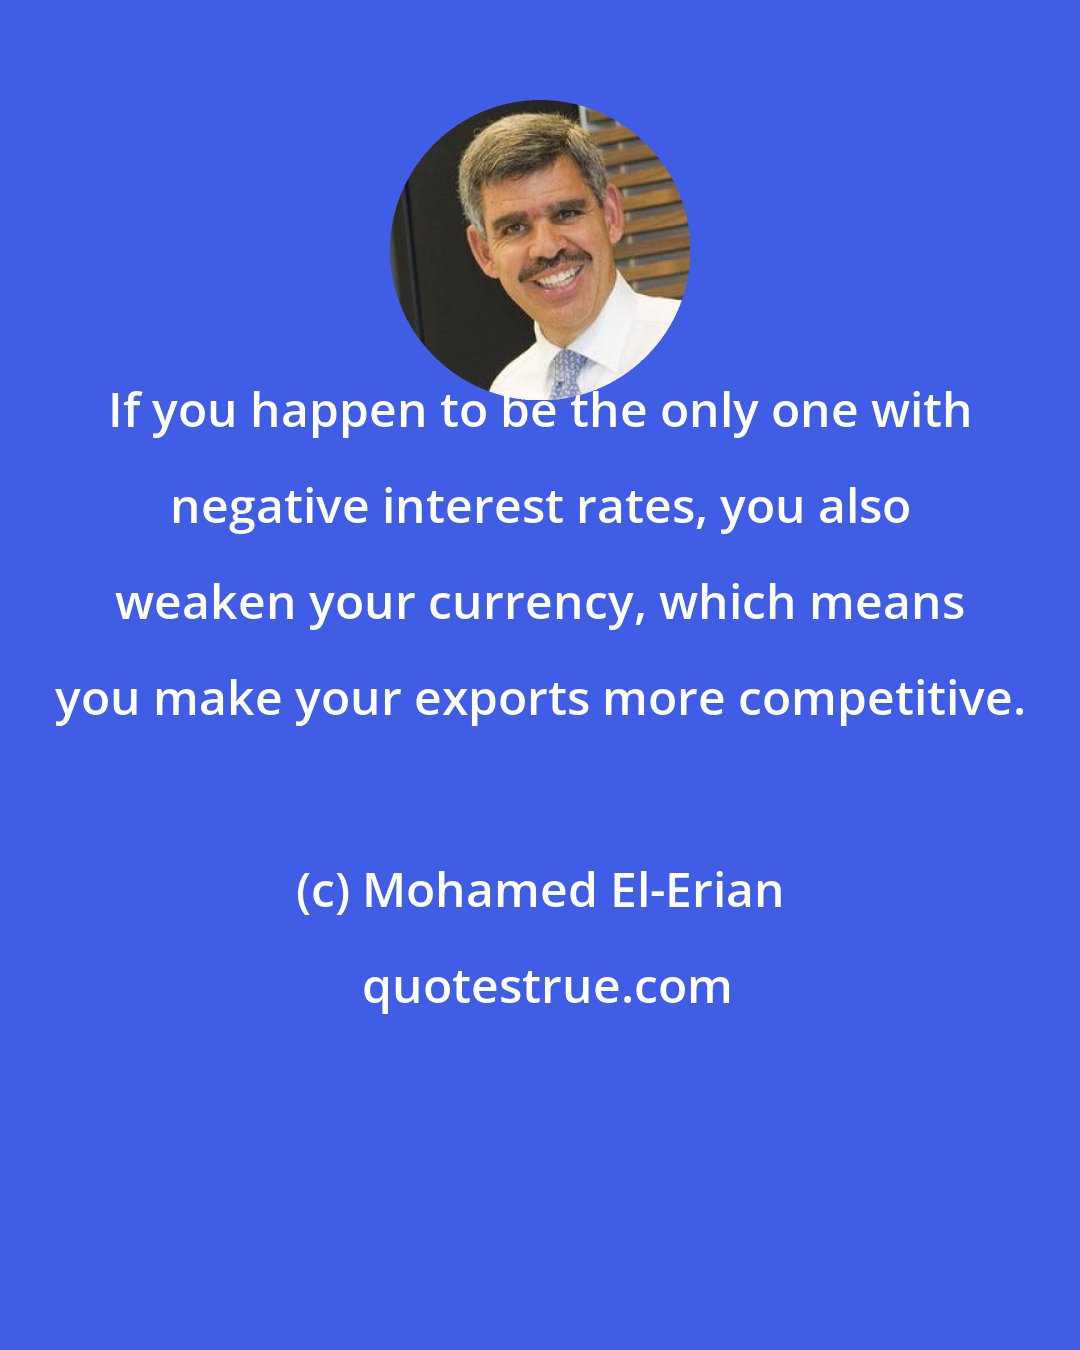 Mohamed El-Erian: If you happen to be the only one with negative interest rates, you also weaken your currency, which means you make your exports more competitive.